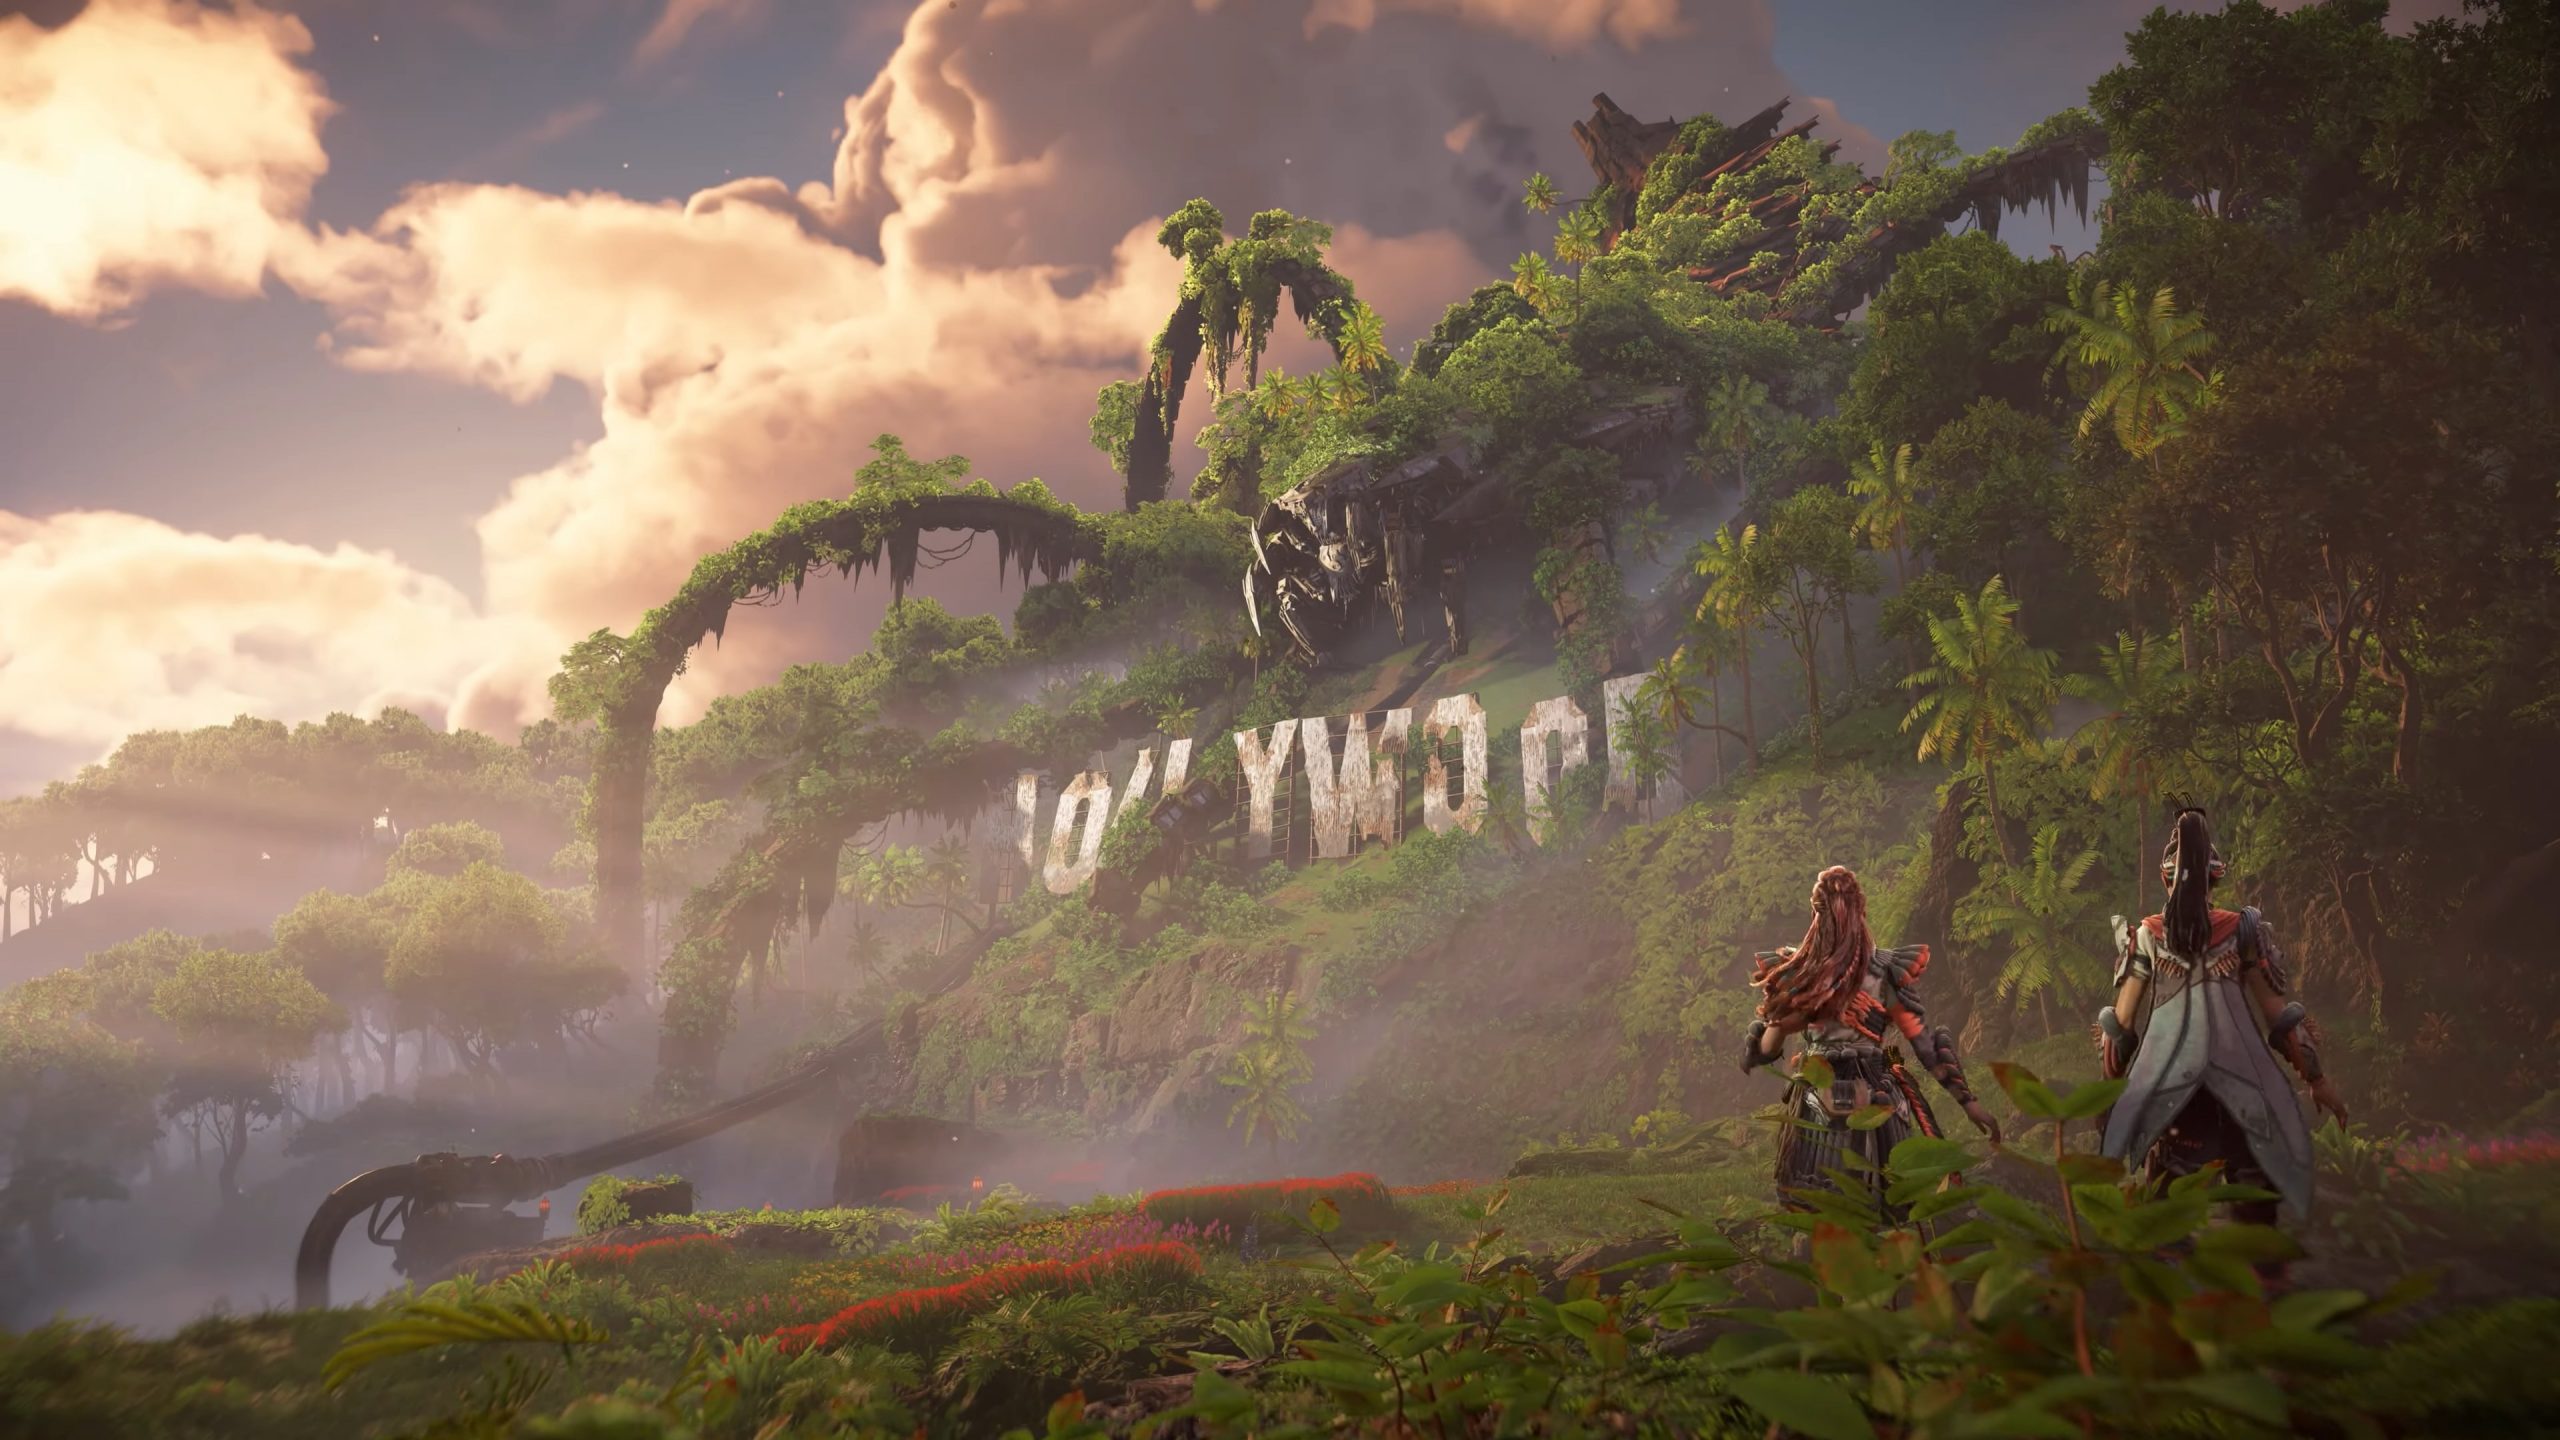 The Horizon Forbidden West cinematic trailer is here – PlayStation.Blog